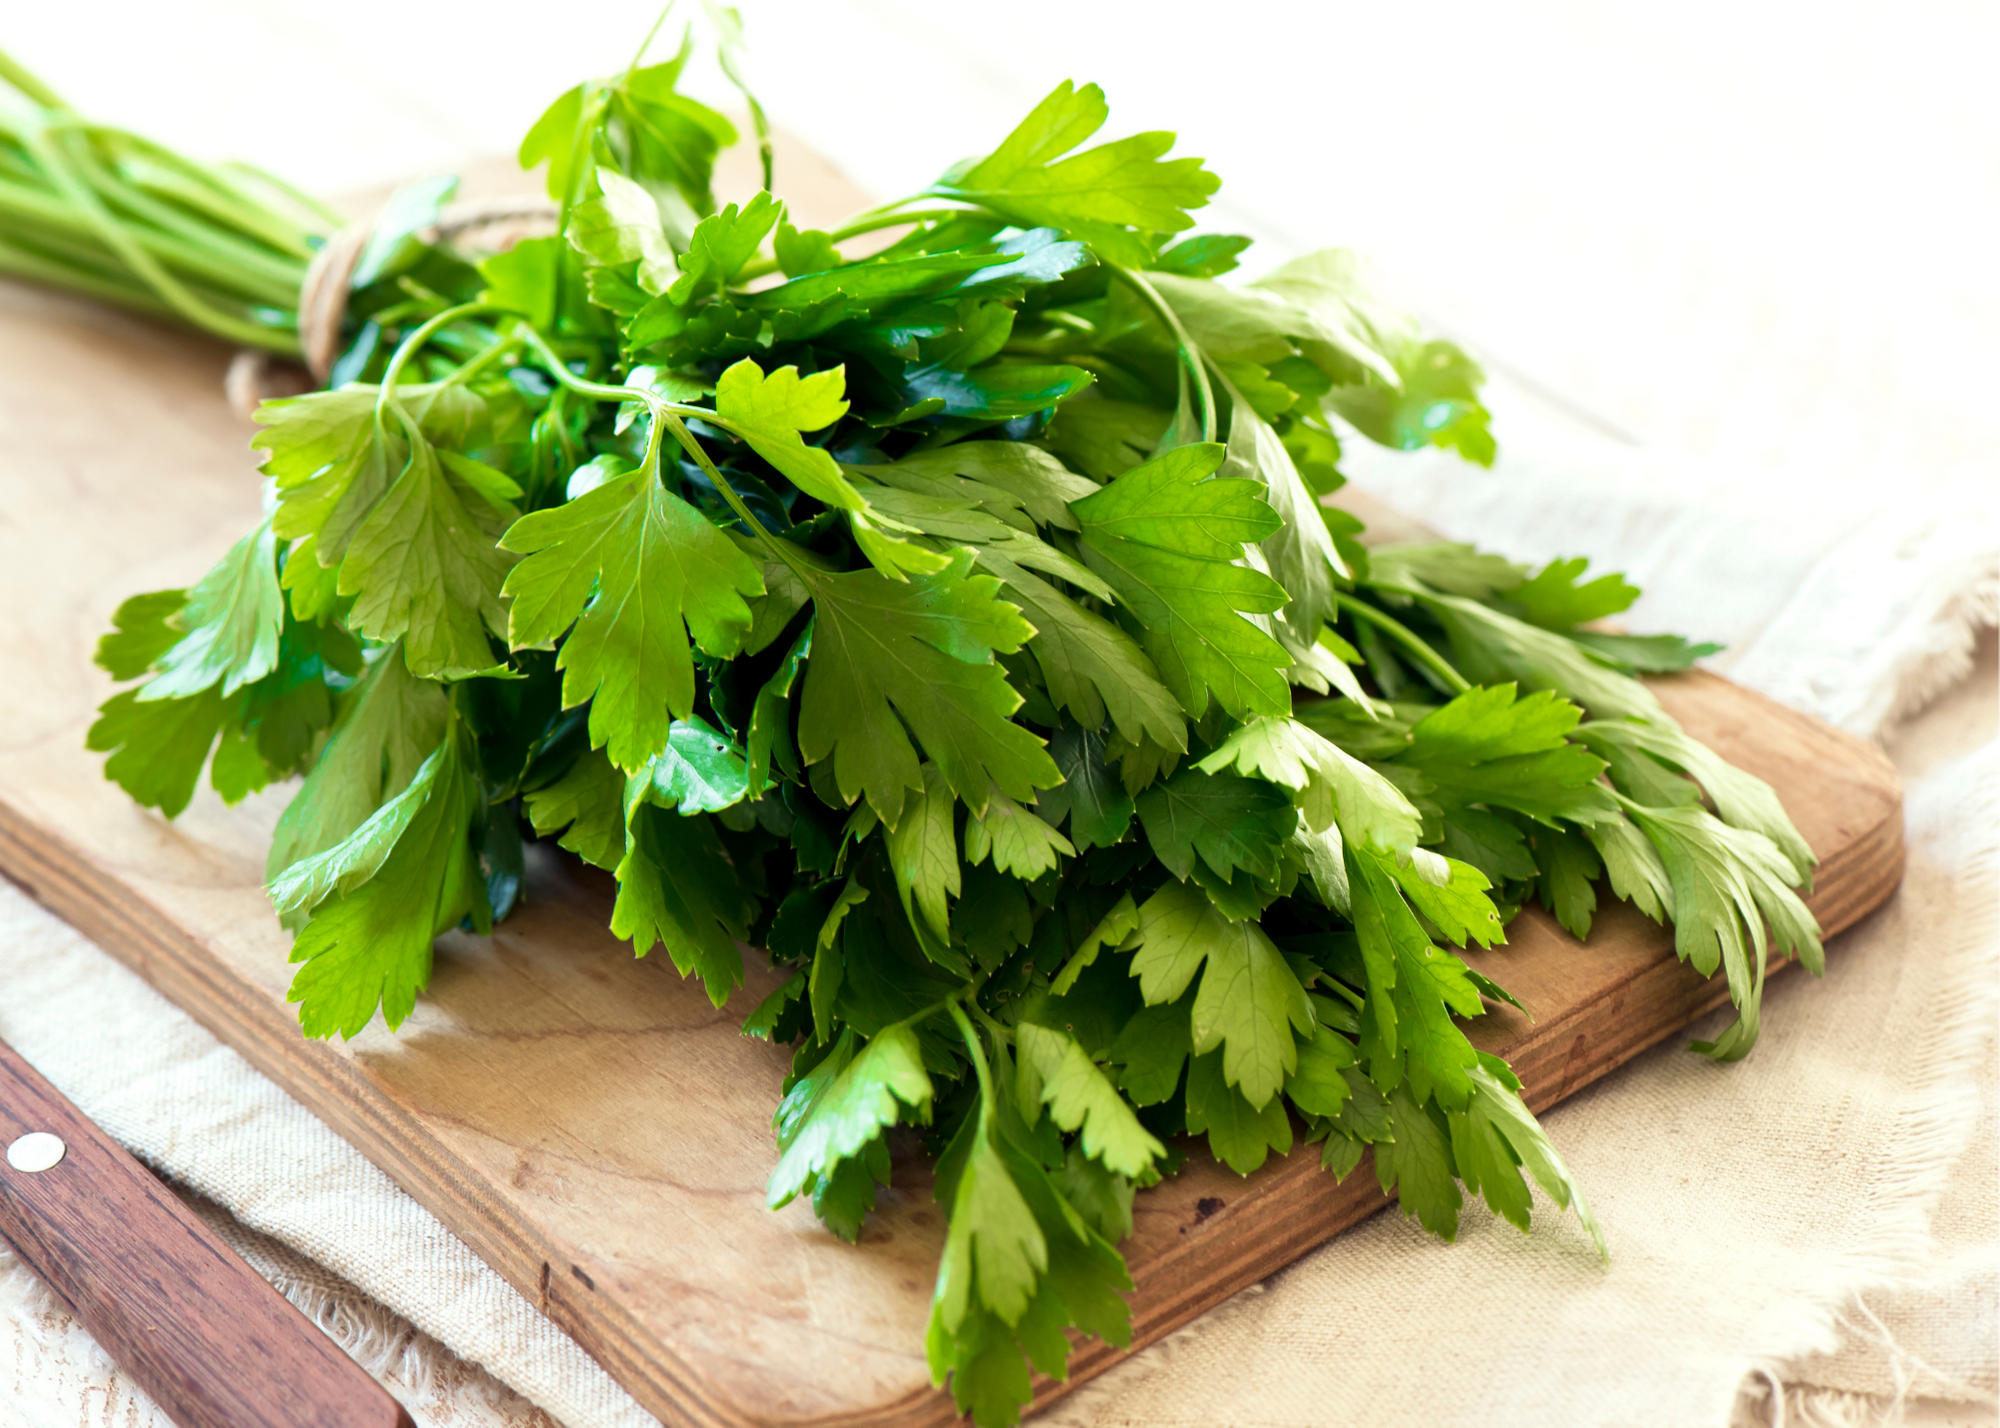 Large bunch of flat leaf parsley tied with twine on wood cutting board.